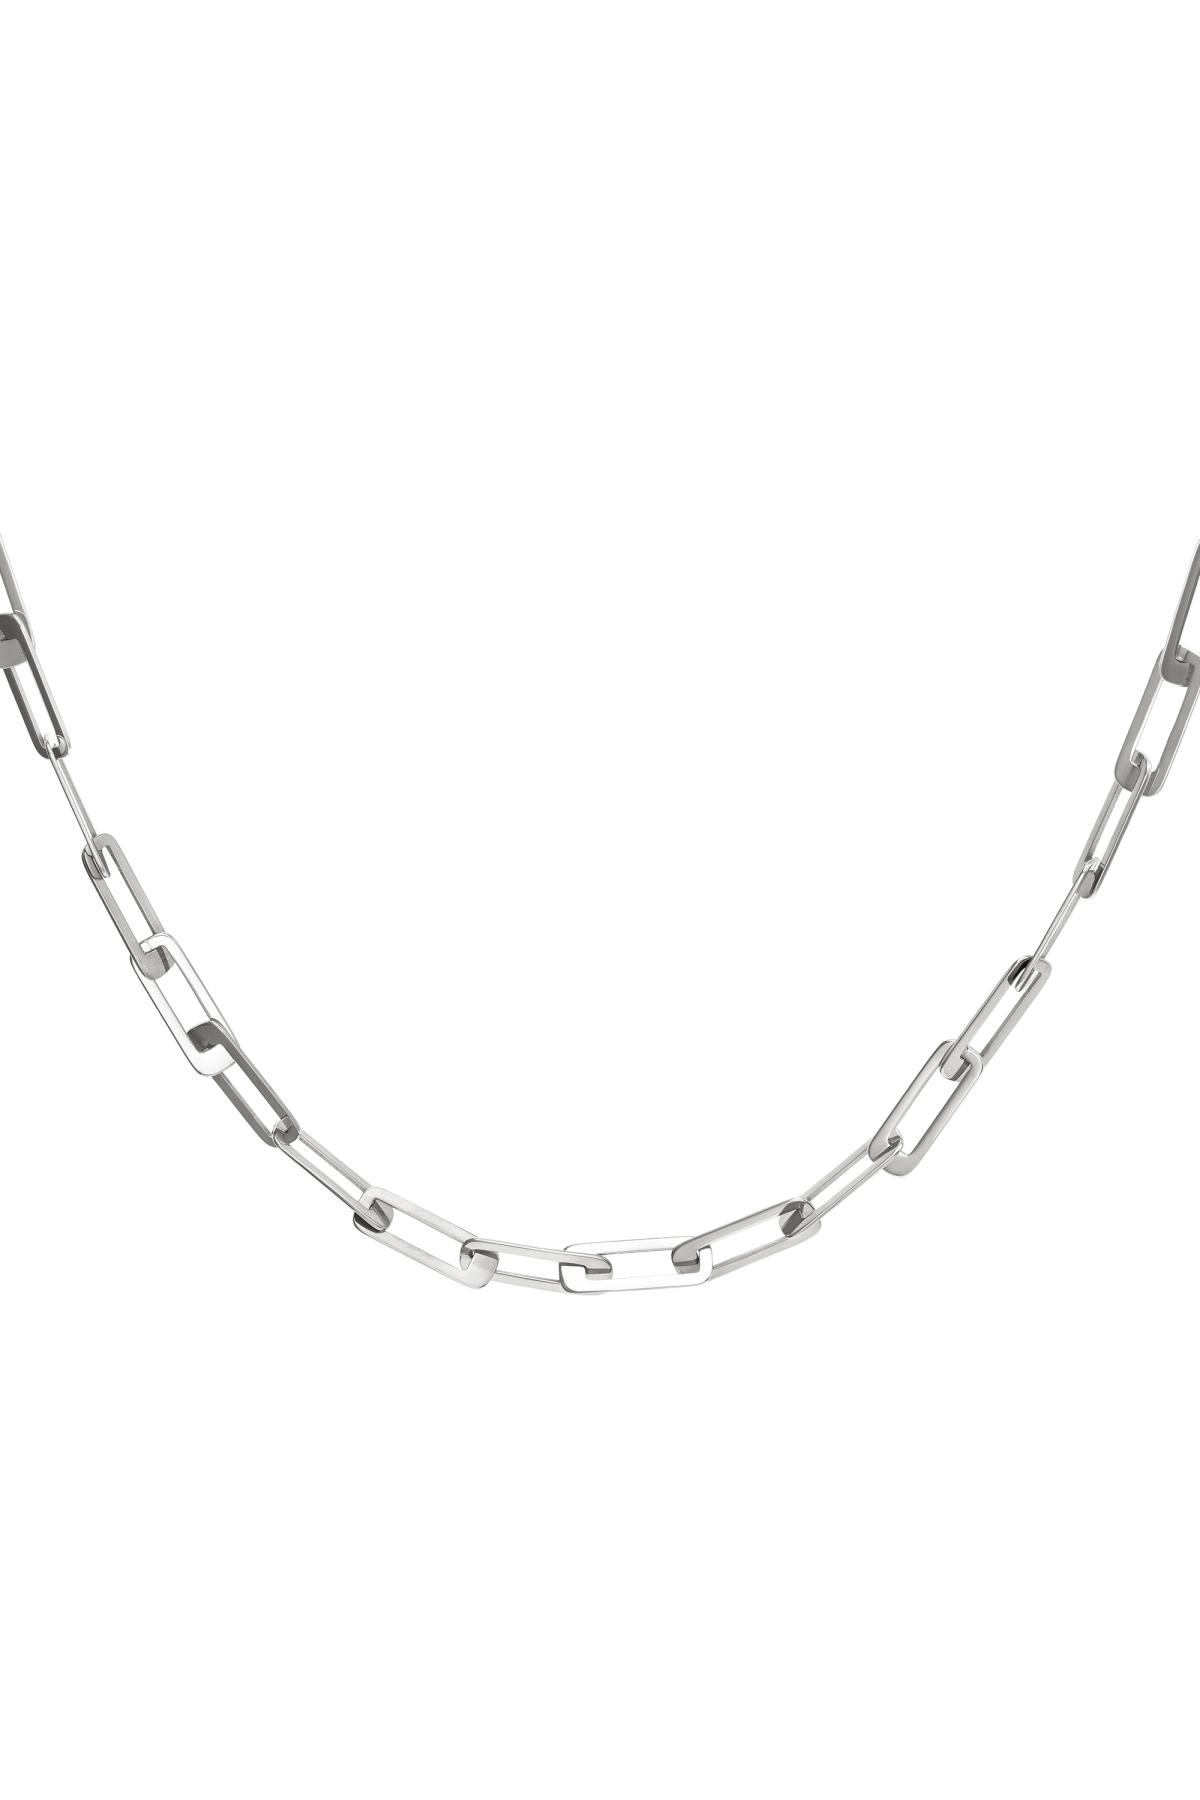 collana a catena spessa Silver Stainless Steel h5 